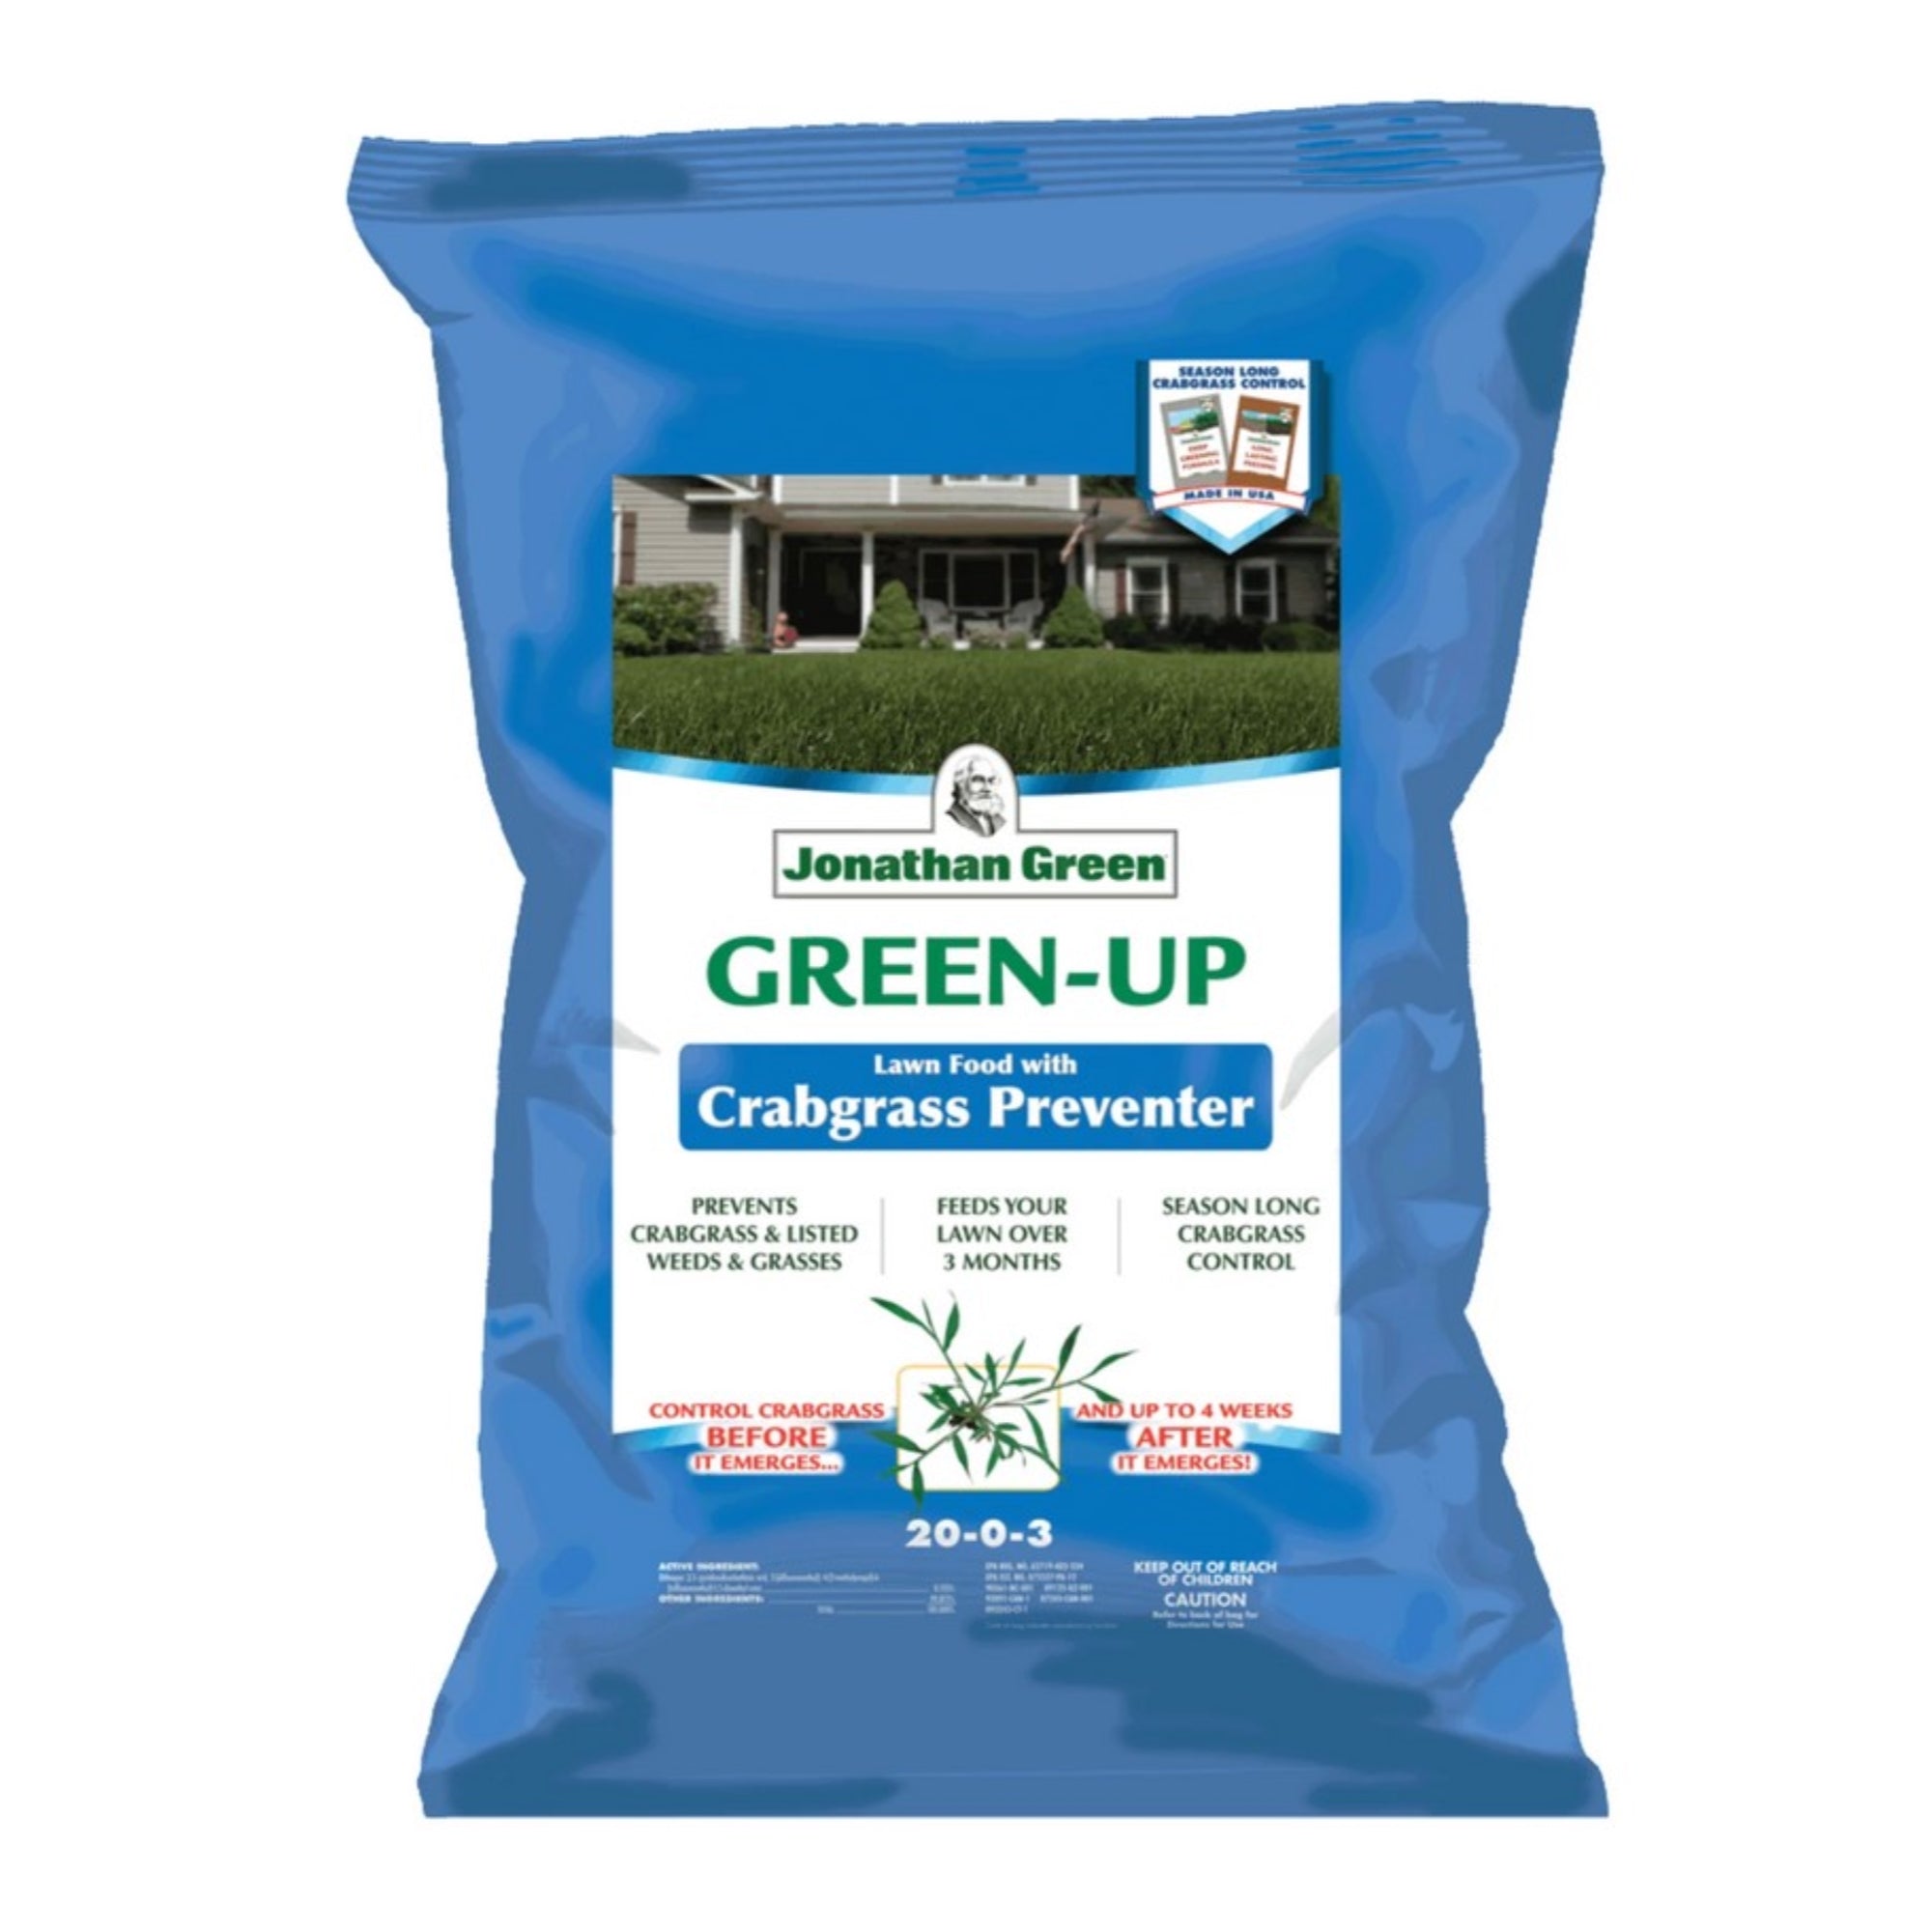 Jonathan Green GREEN-UP Lawn Food with Crabgrass Preventer